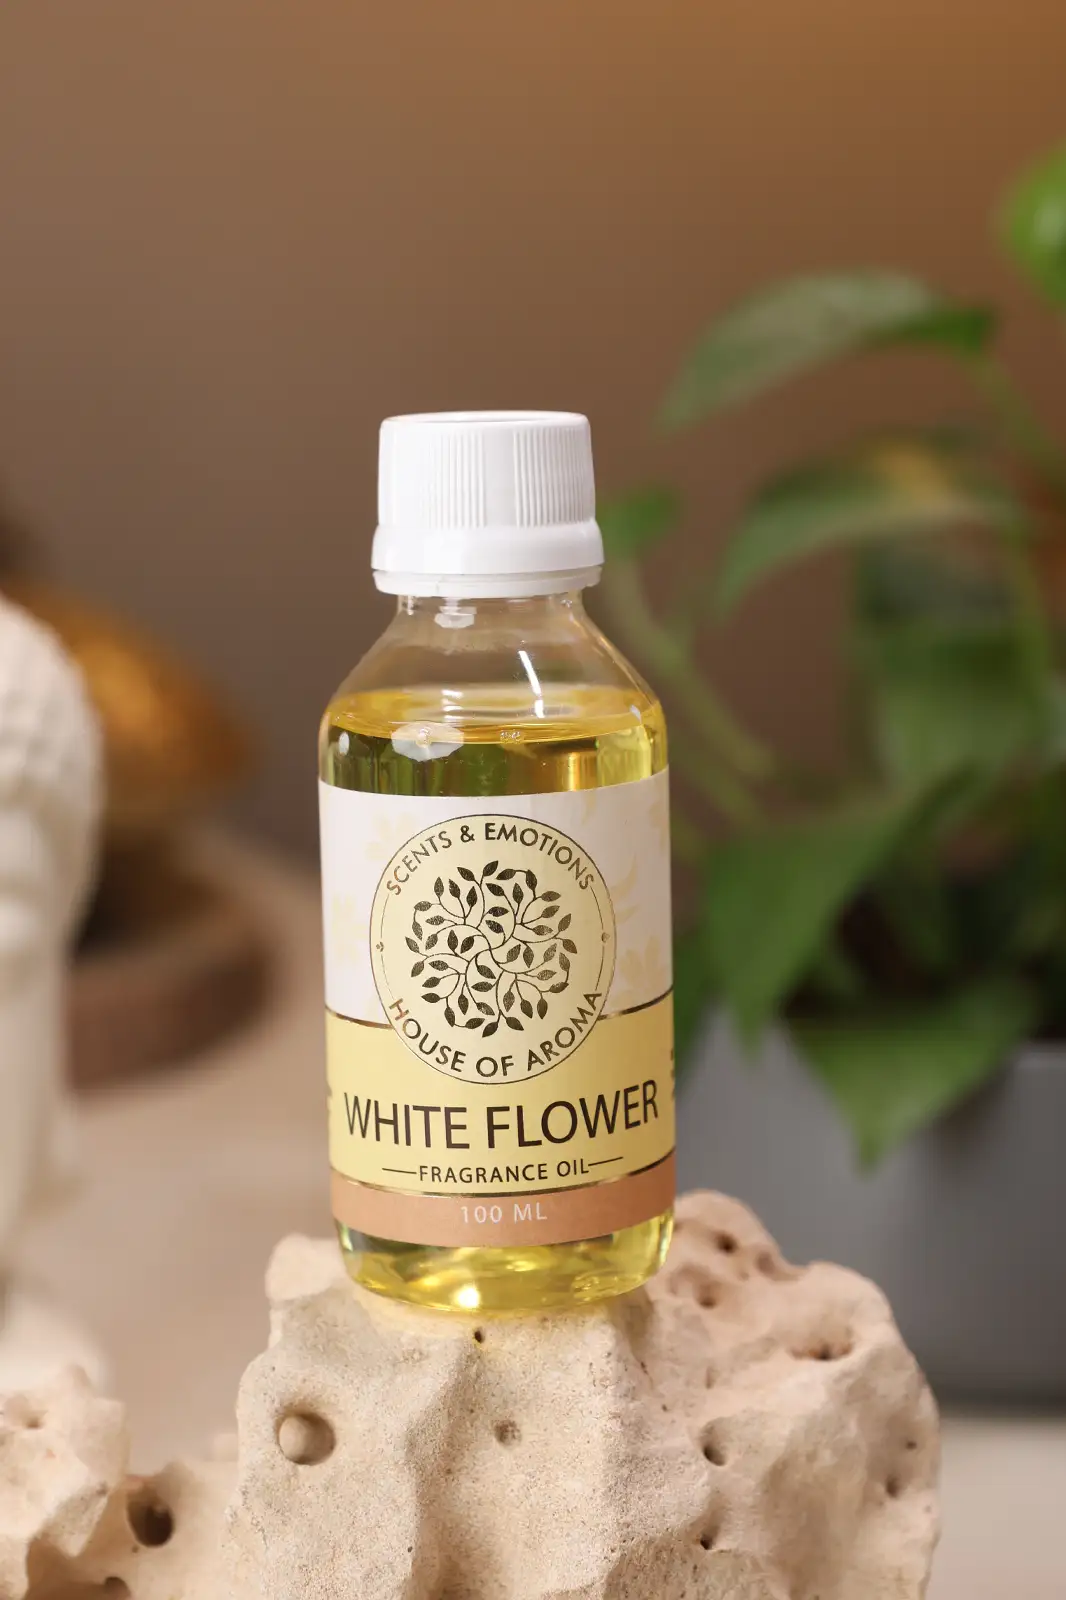 white flower fragrance oil 100ml, Fragrance Oil, Aroma oil, Synthetic oils, Fragrance oil for candles, oil for diffusers, Aromatic oil, Candle oil, Aromatherapy oil, oil manufacturers, House of Aroma, white flower fragrance oil, white flower with fragrance, white scented flowers in india, what is white floral scent, white flower oil scent, white floral oil, flowers fragrance, fragrance white flowers, floral aroma oil